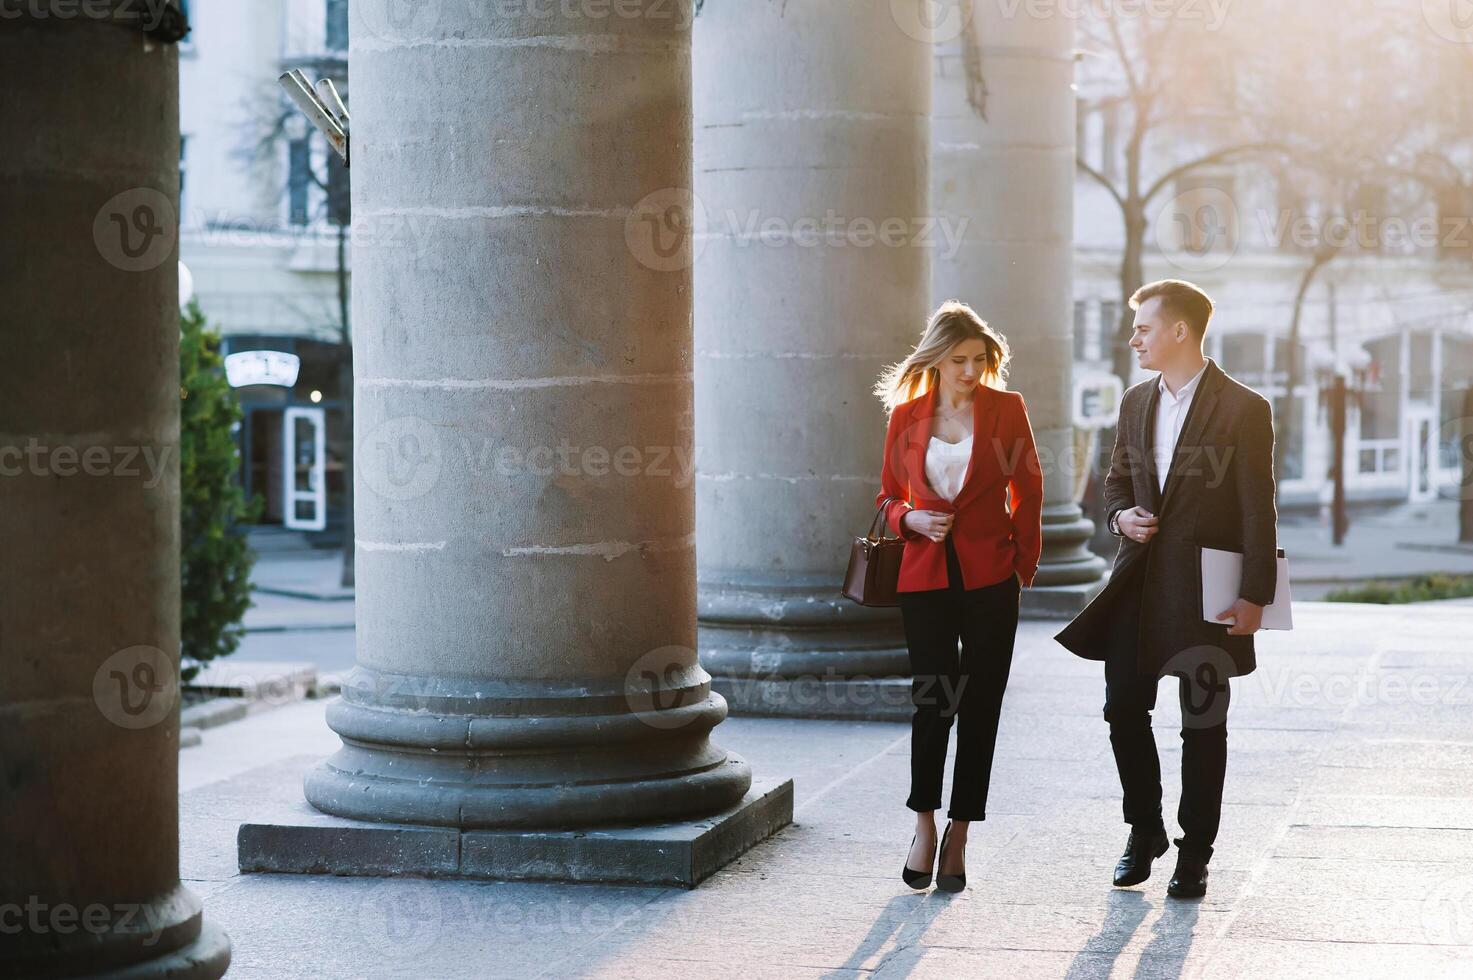 Business Woman and Business Man Use Smartphone and Talk on the Busy Big City Street. Both Look Exquisitely Stylish. photo